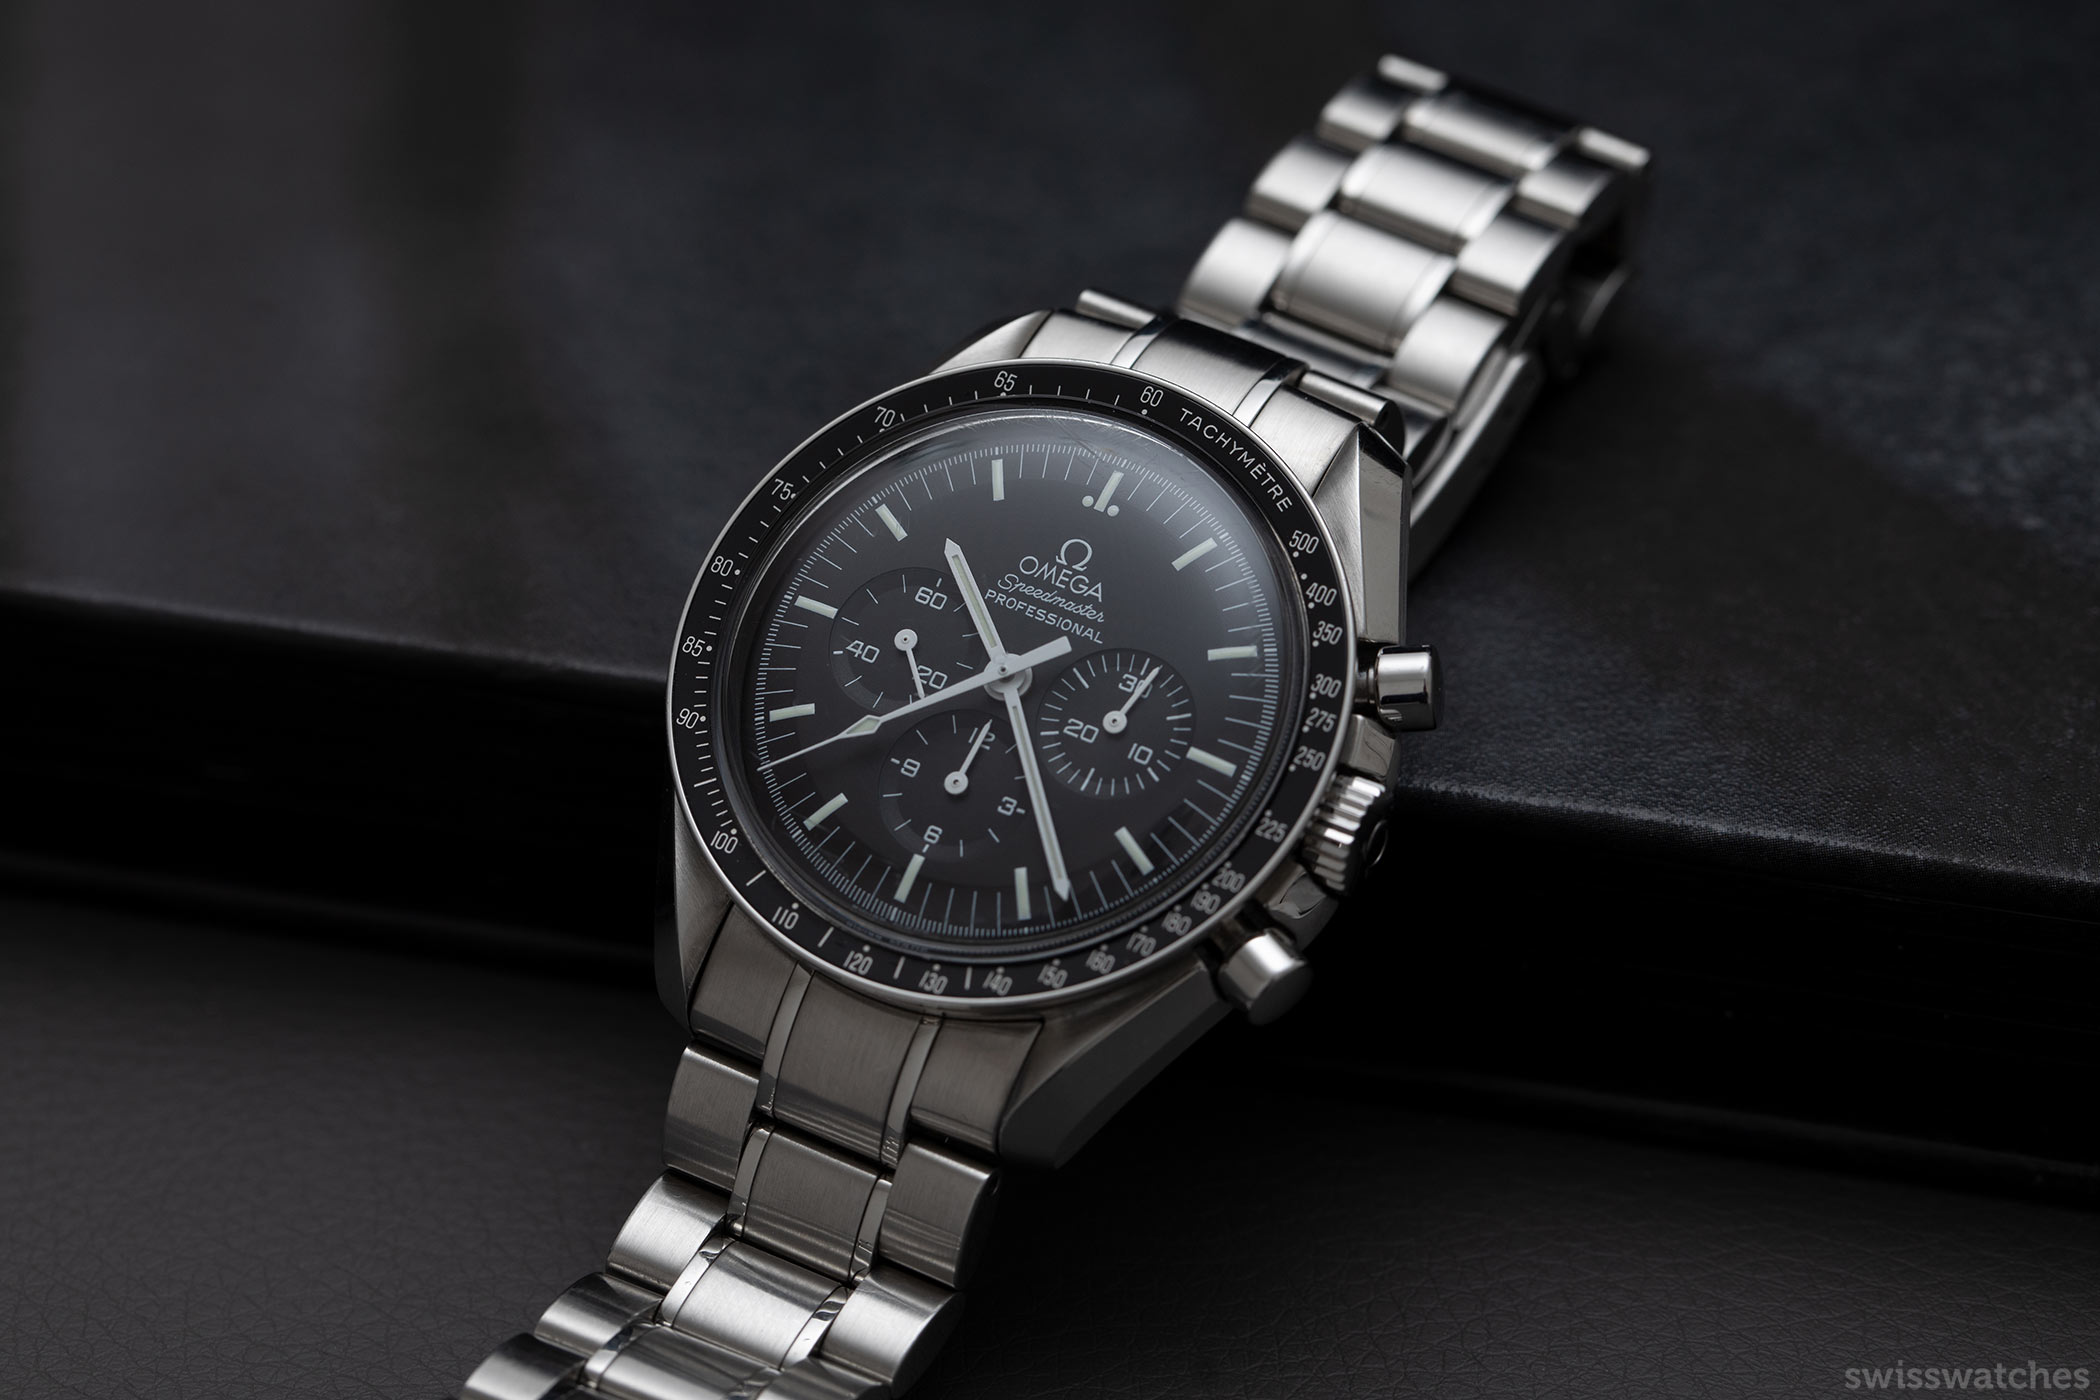 Omega Speedmaster Moonwatch Professional Master Chronometer Chronograph  42mm Watch, Silver and Black, O31030425001001